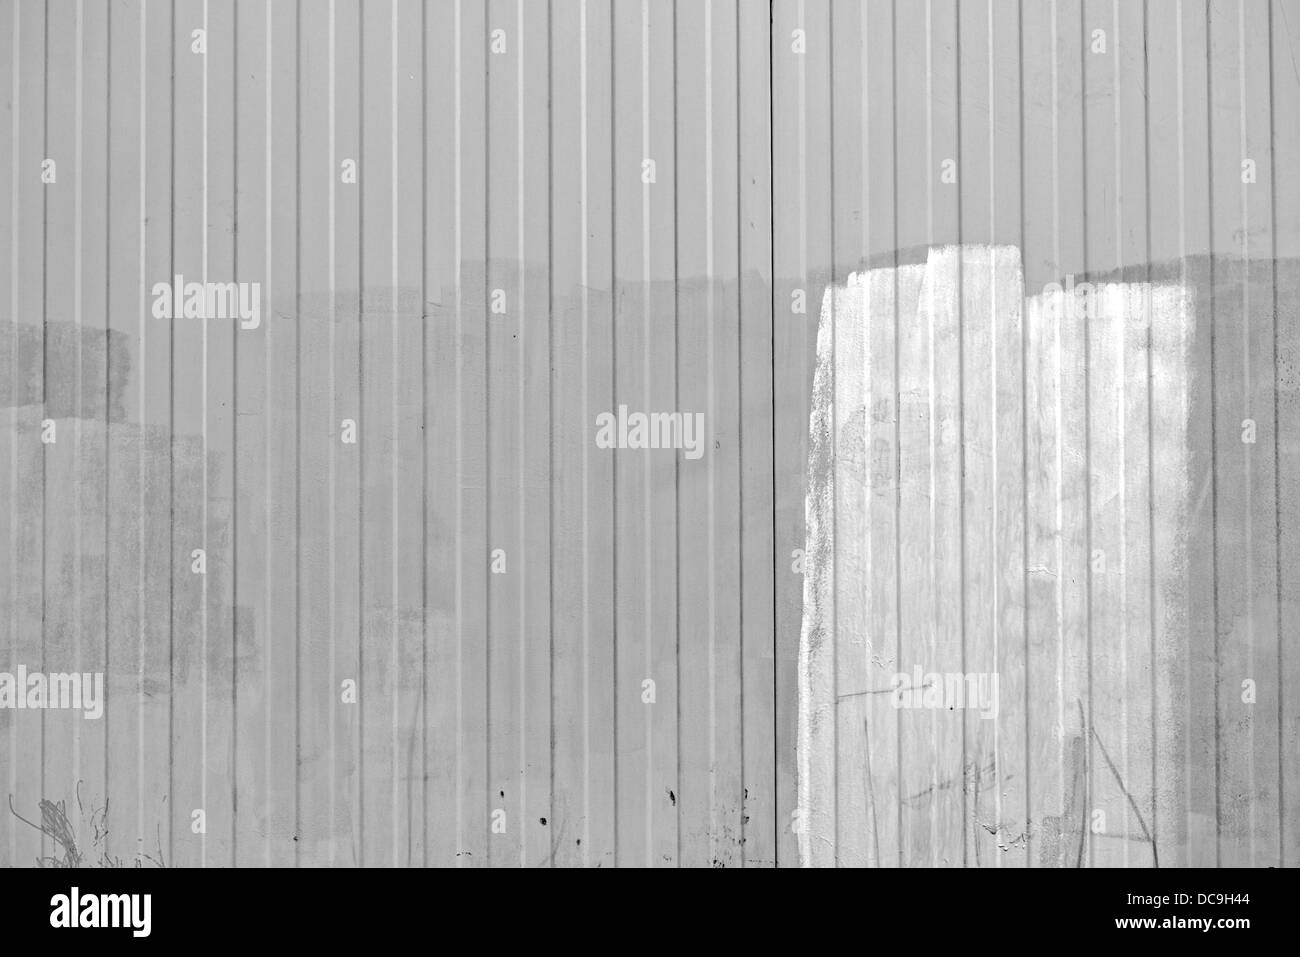 Gray metal texture as a background. Stock Photo